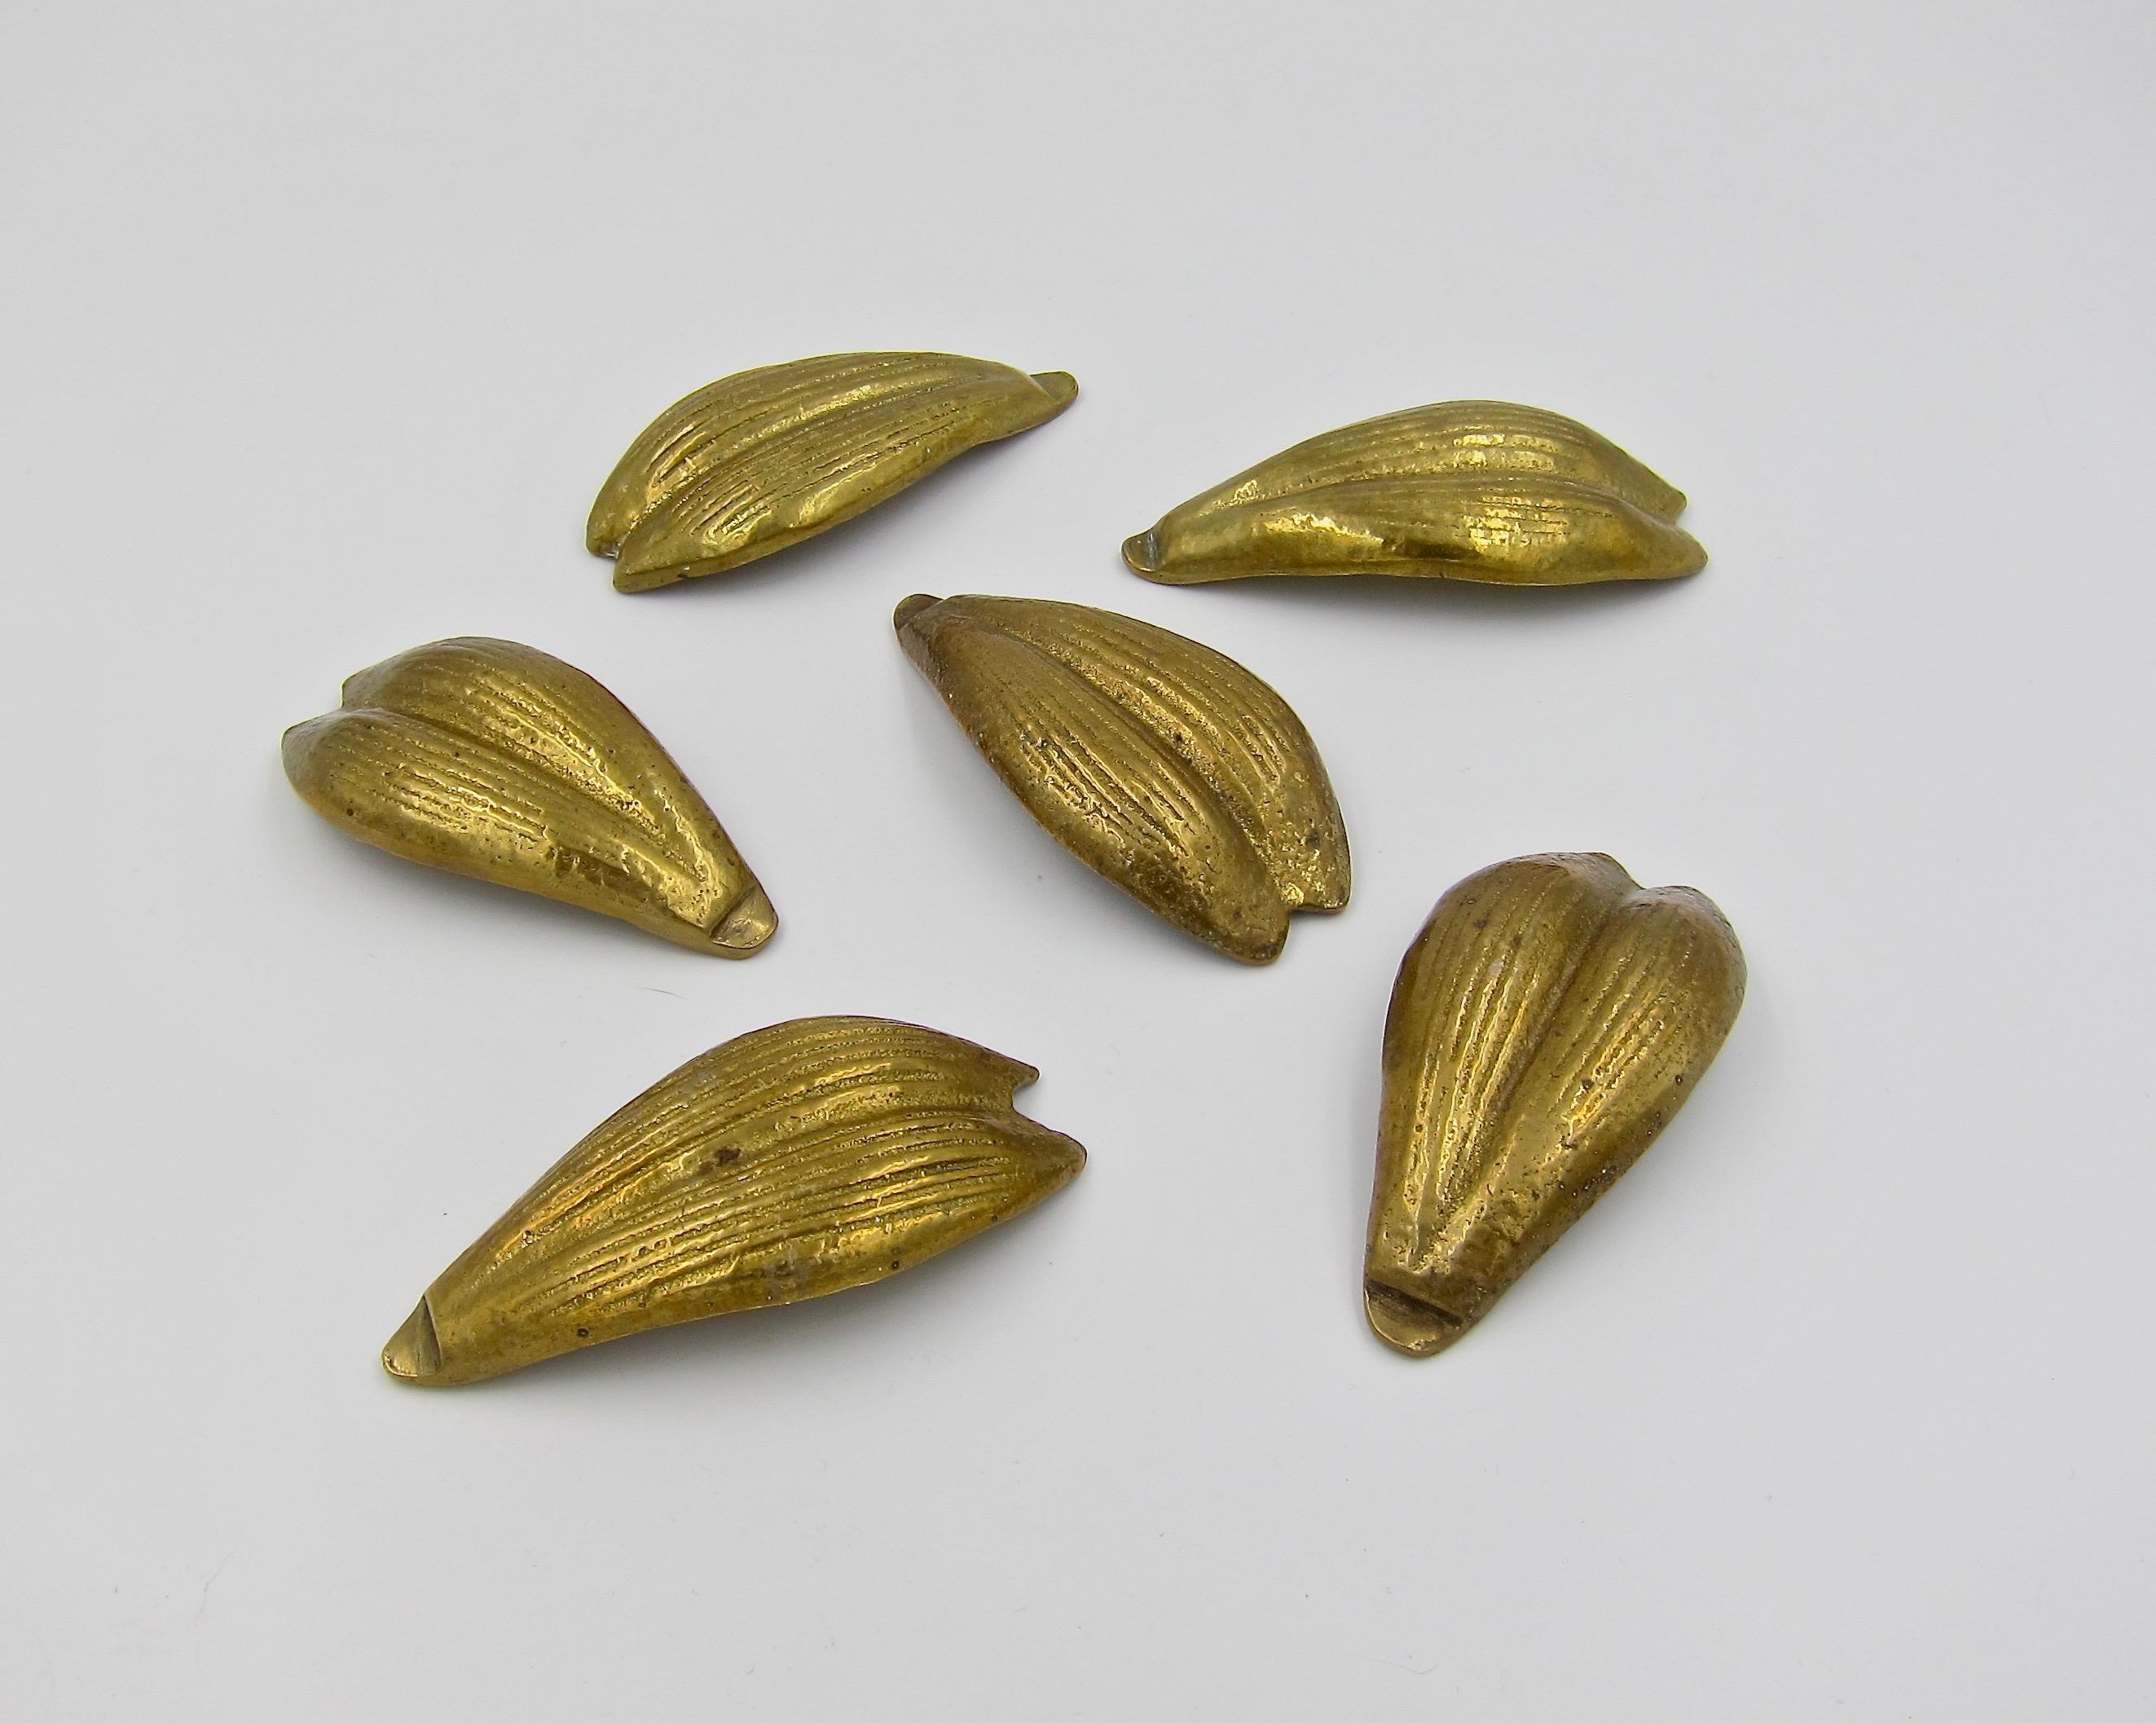 A vintage set of six small and stackable leaf dishes or ashtrays with textured surfaces. The pieces were cast in brass and each remain in very good condition with dark golden patinas. The leaves are perfect ornaments for outdoor spaces and would